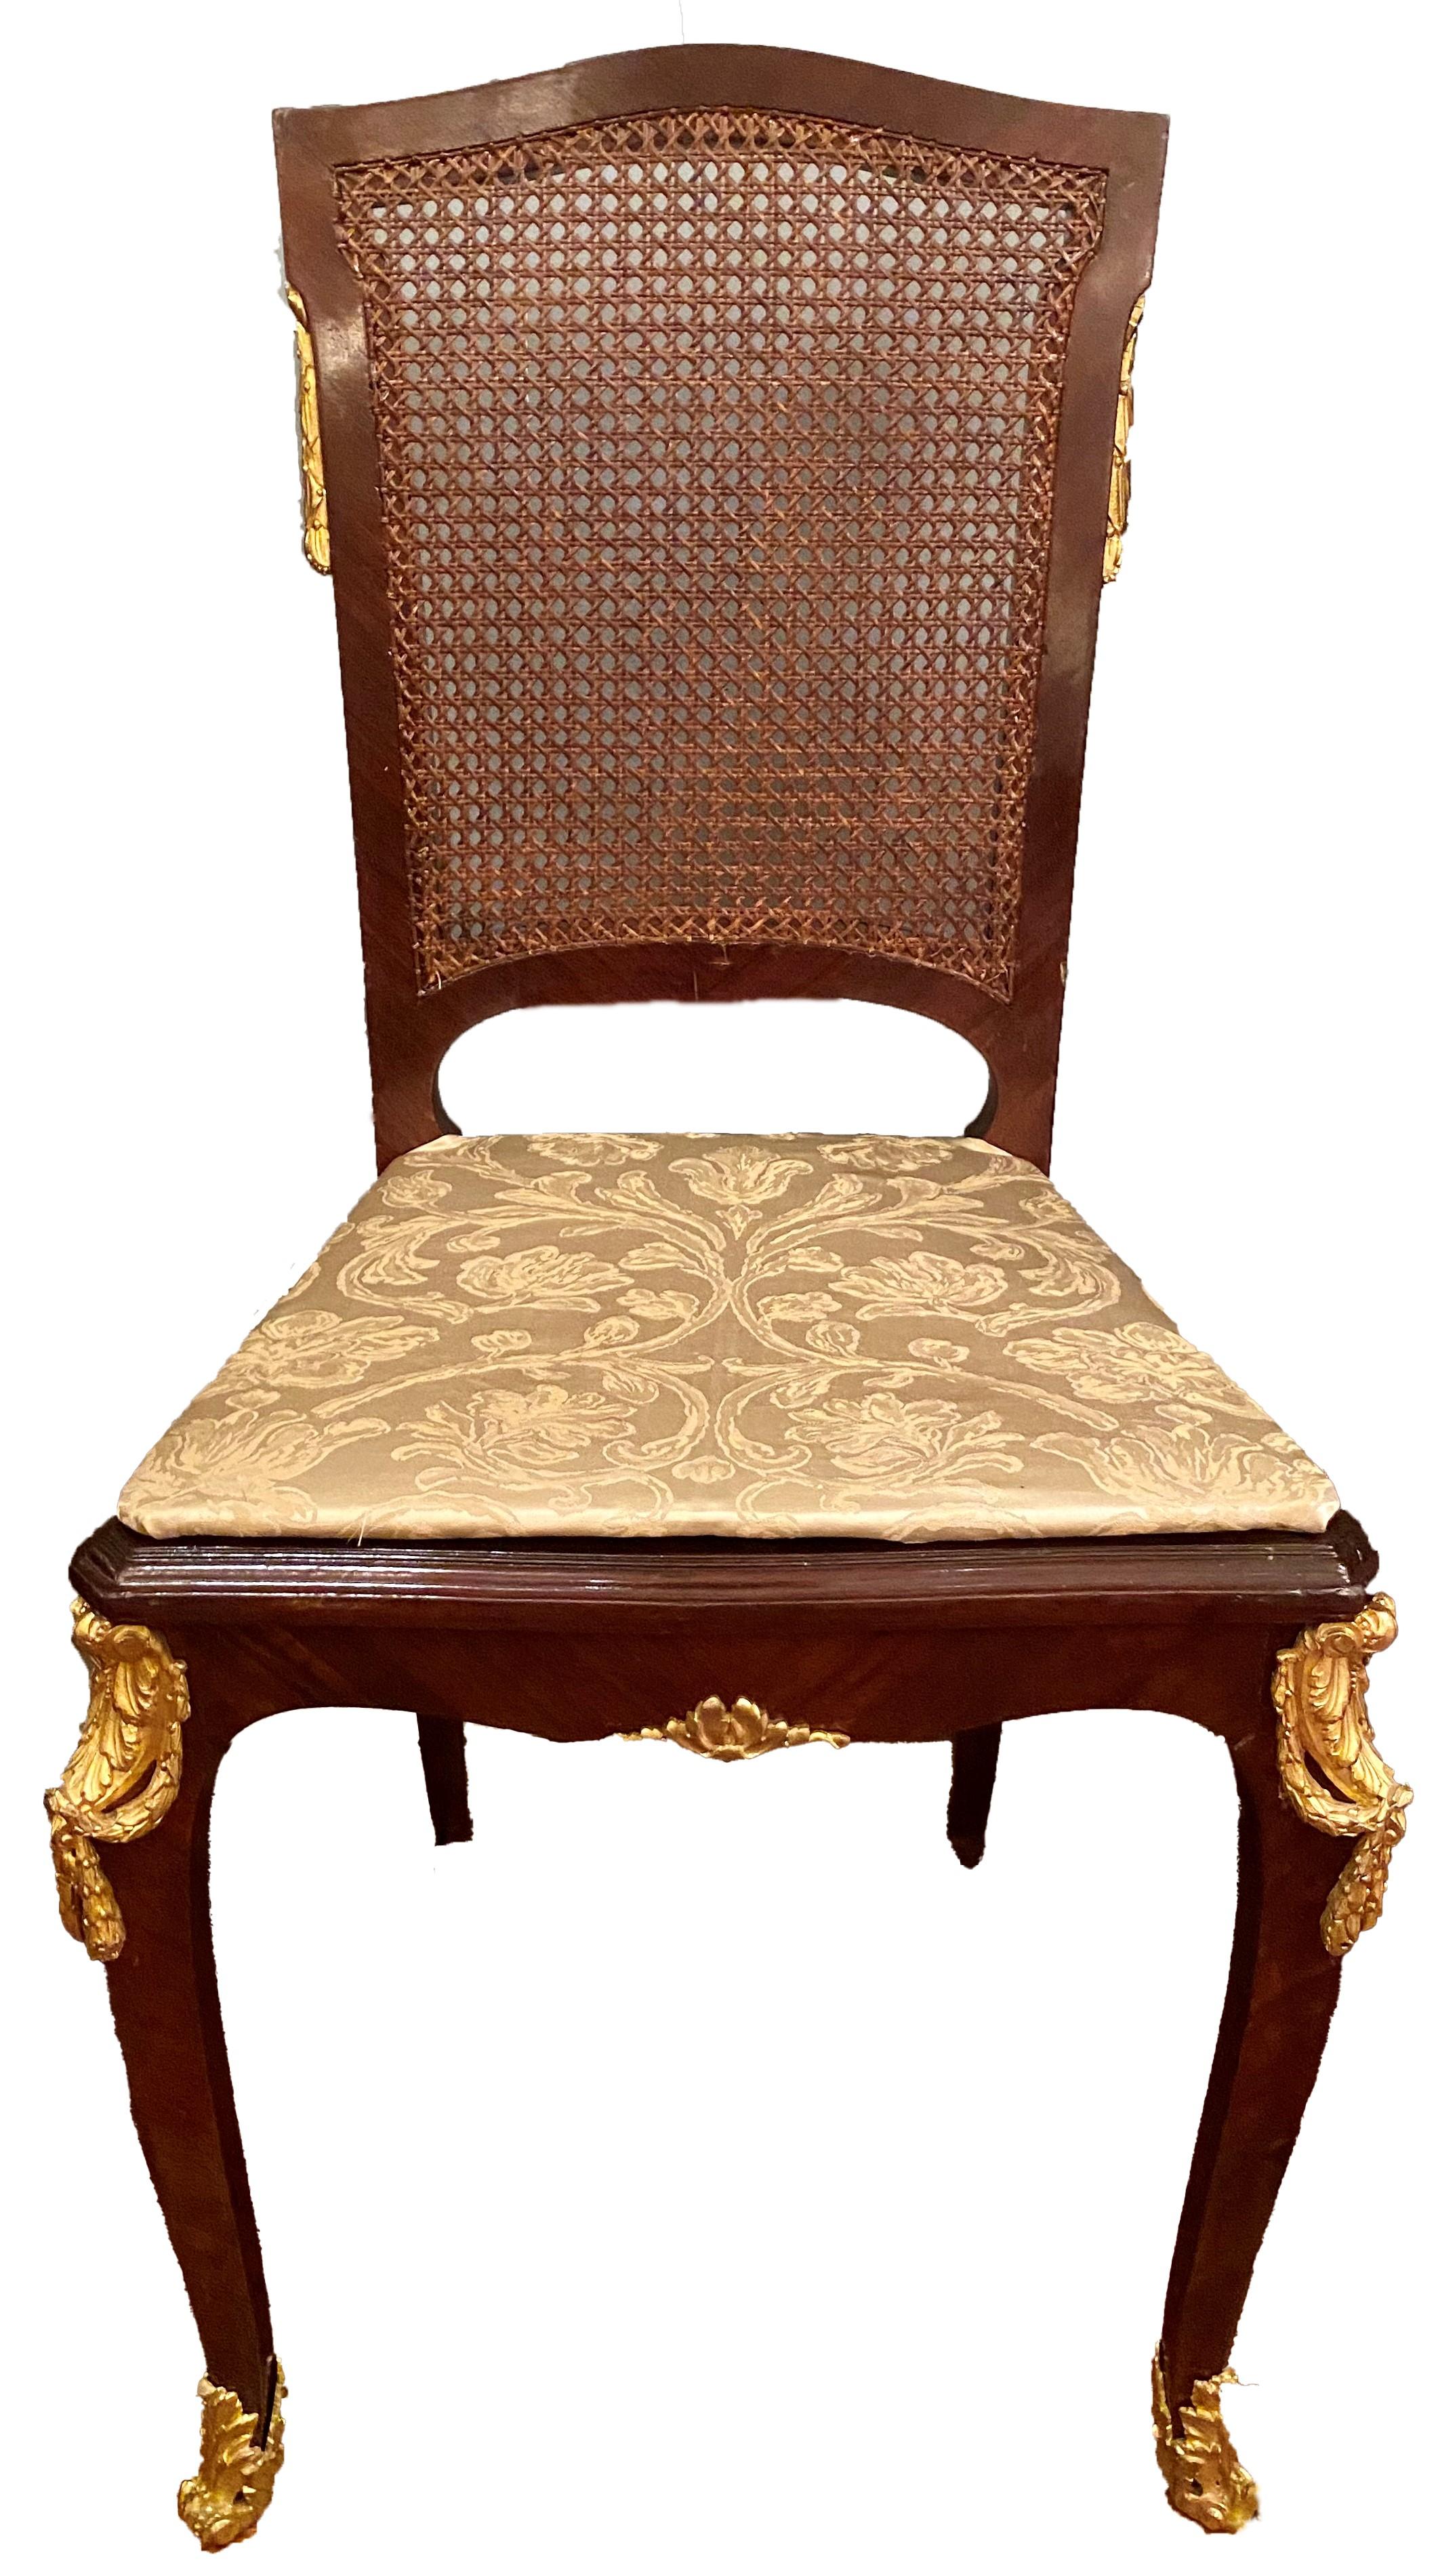 Exceptional antique French Napoleon III style mahogany and ormolu banquet dining table with 12 chairs included, Circa 1890-1900.
Measures: Table 30